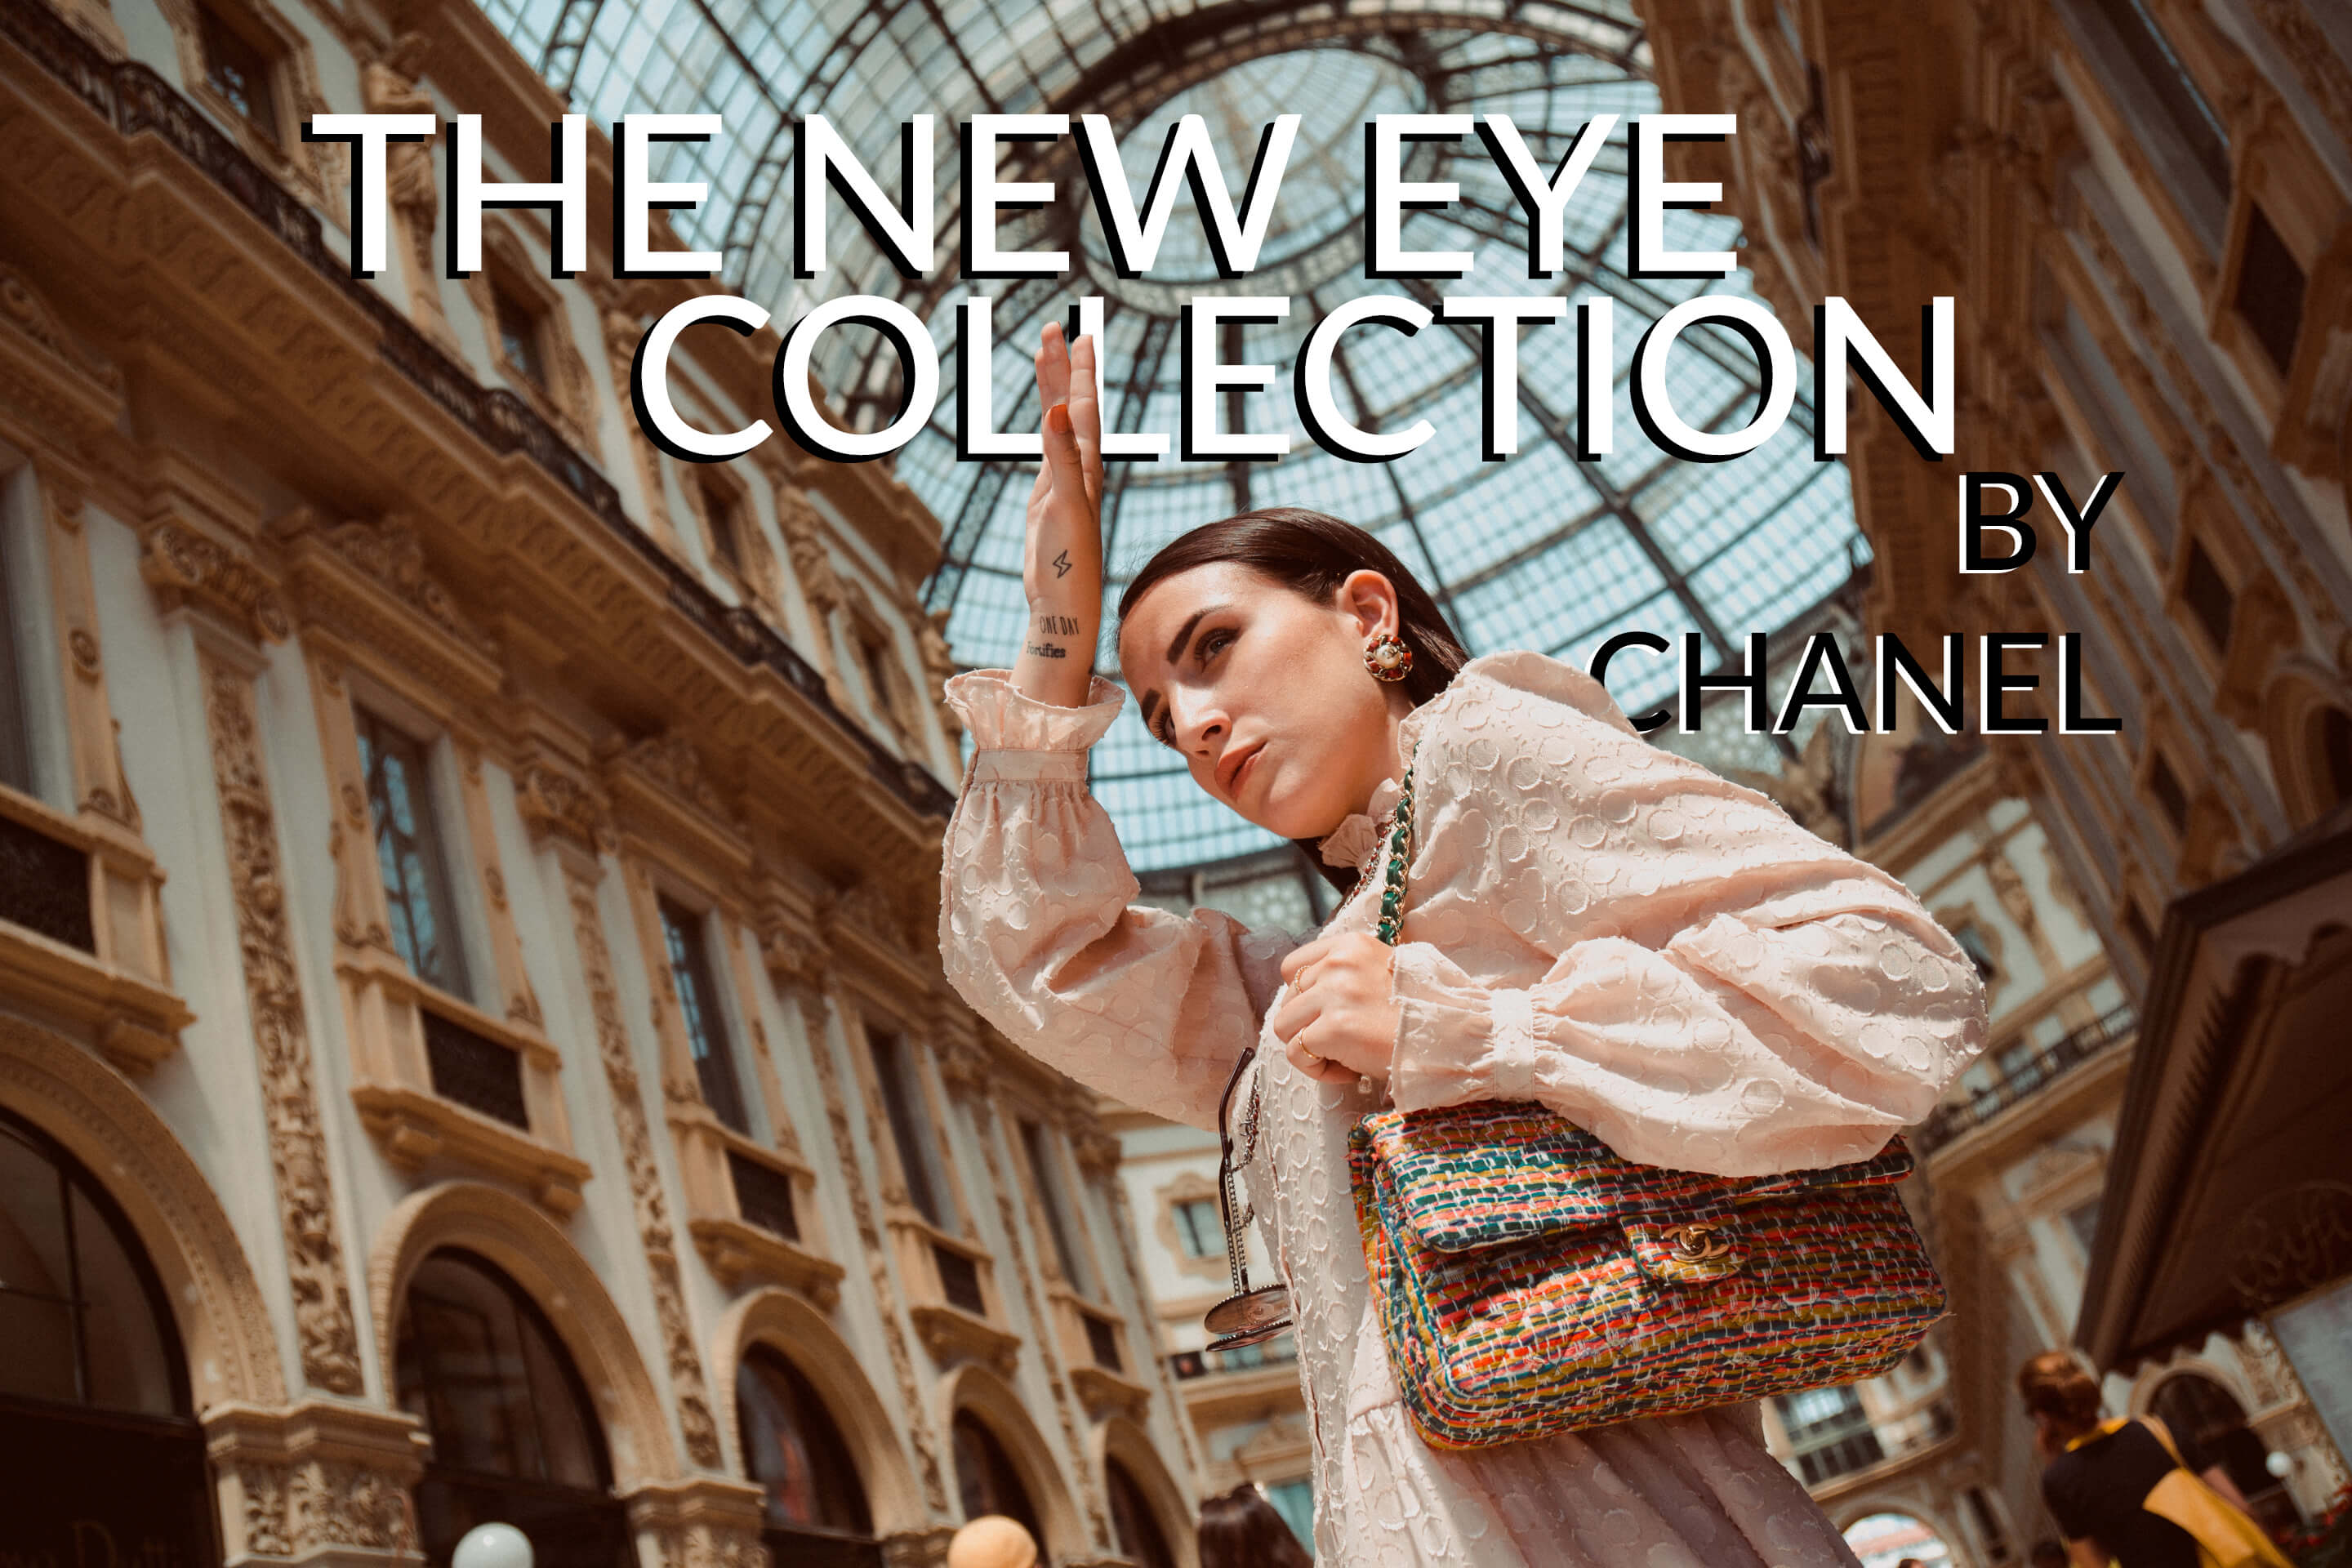 The Italian Rêve – The New Eye Collection by Chanel: Blurry is The